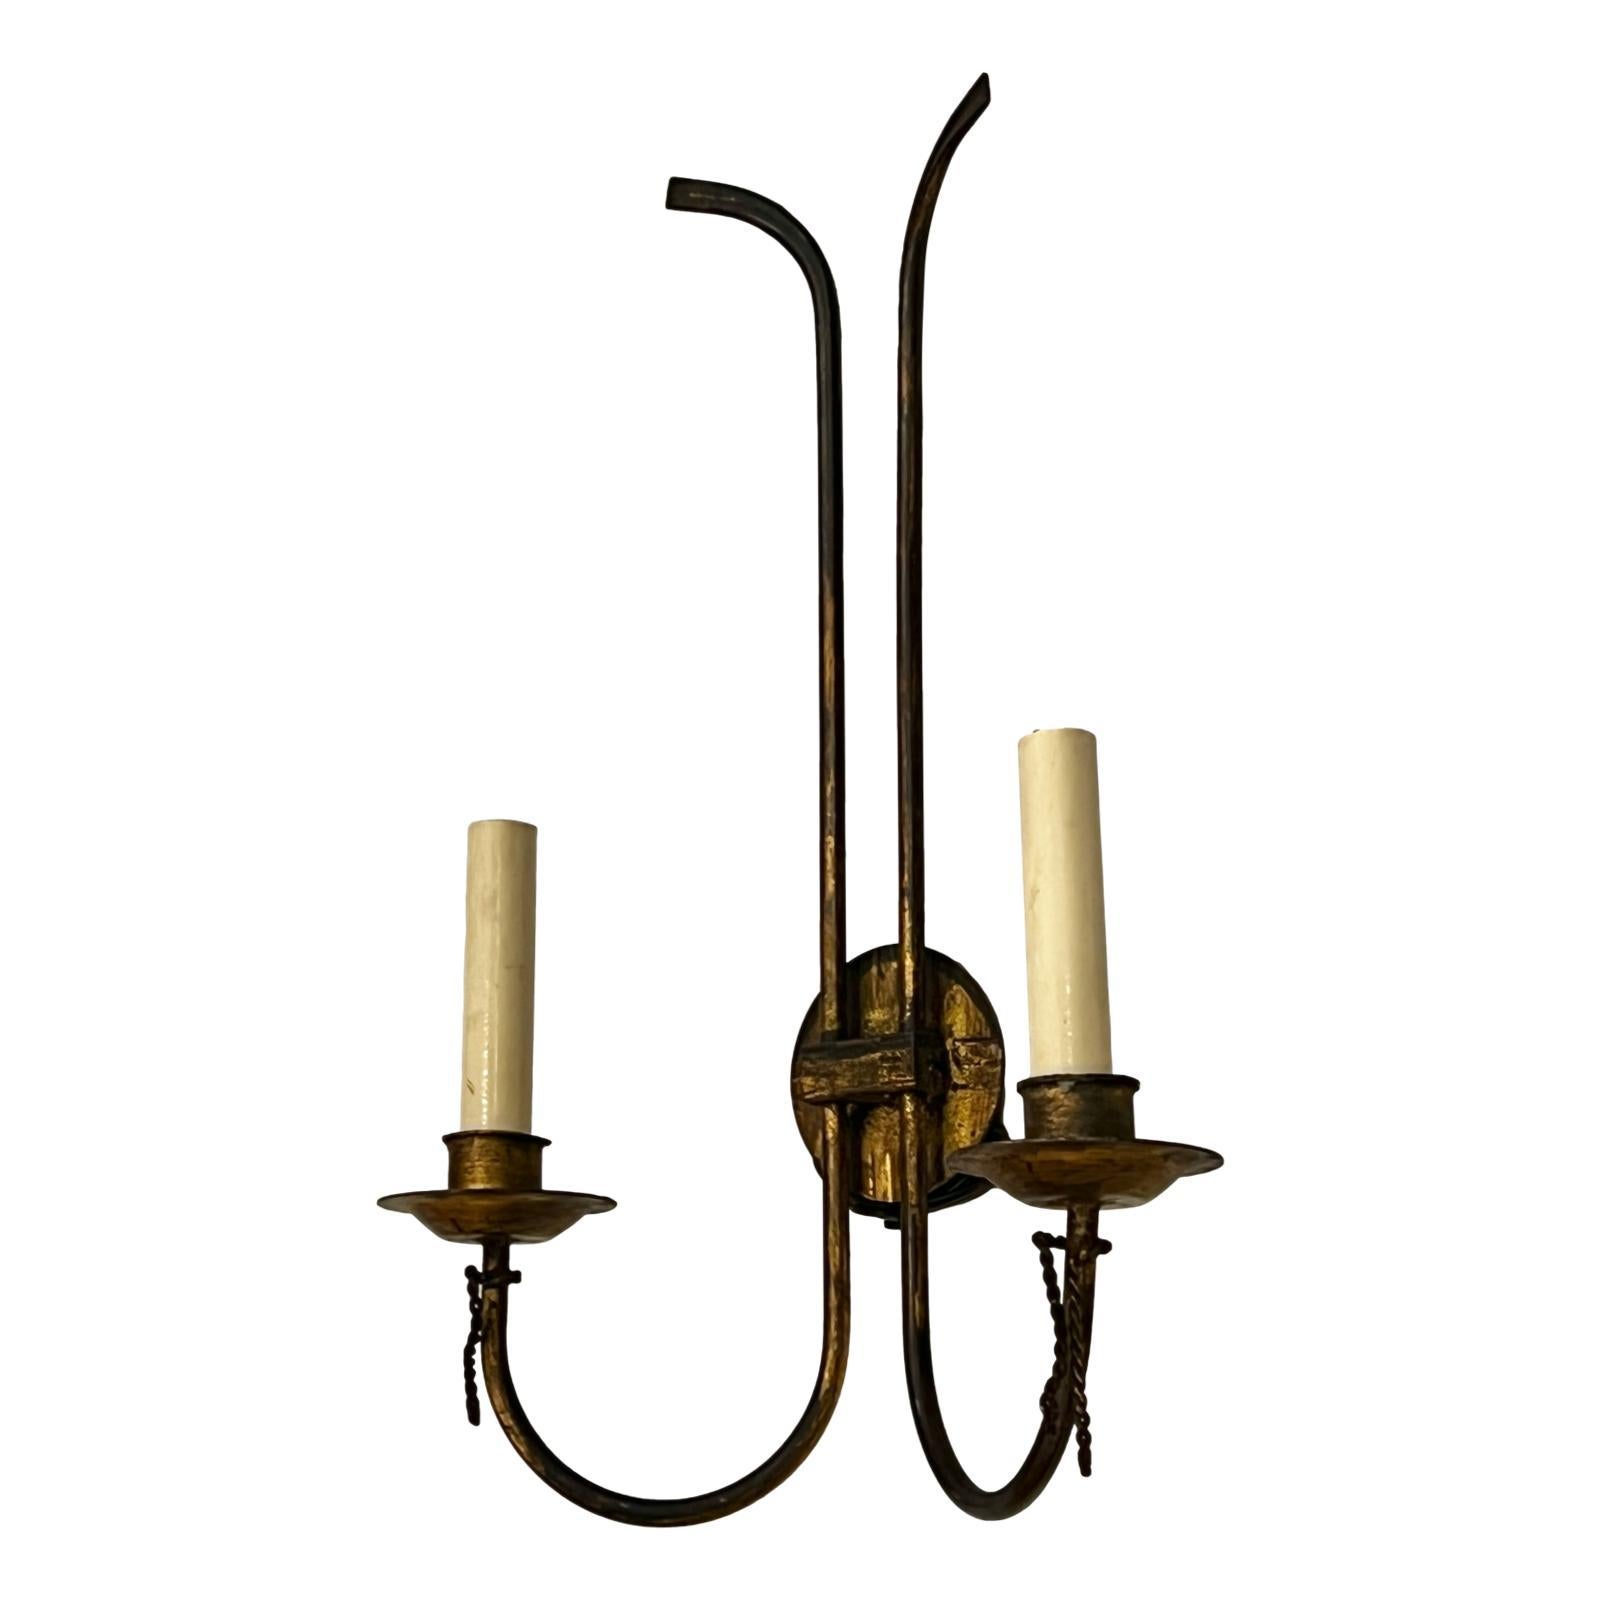 Pair of circa 1940's French gilt metal moderne style double light sconces.

Measurements:
Height: 17